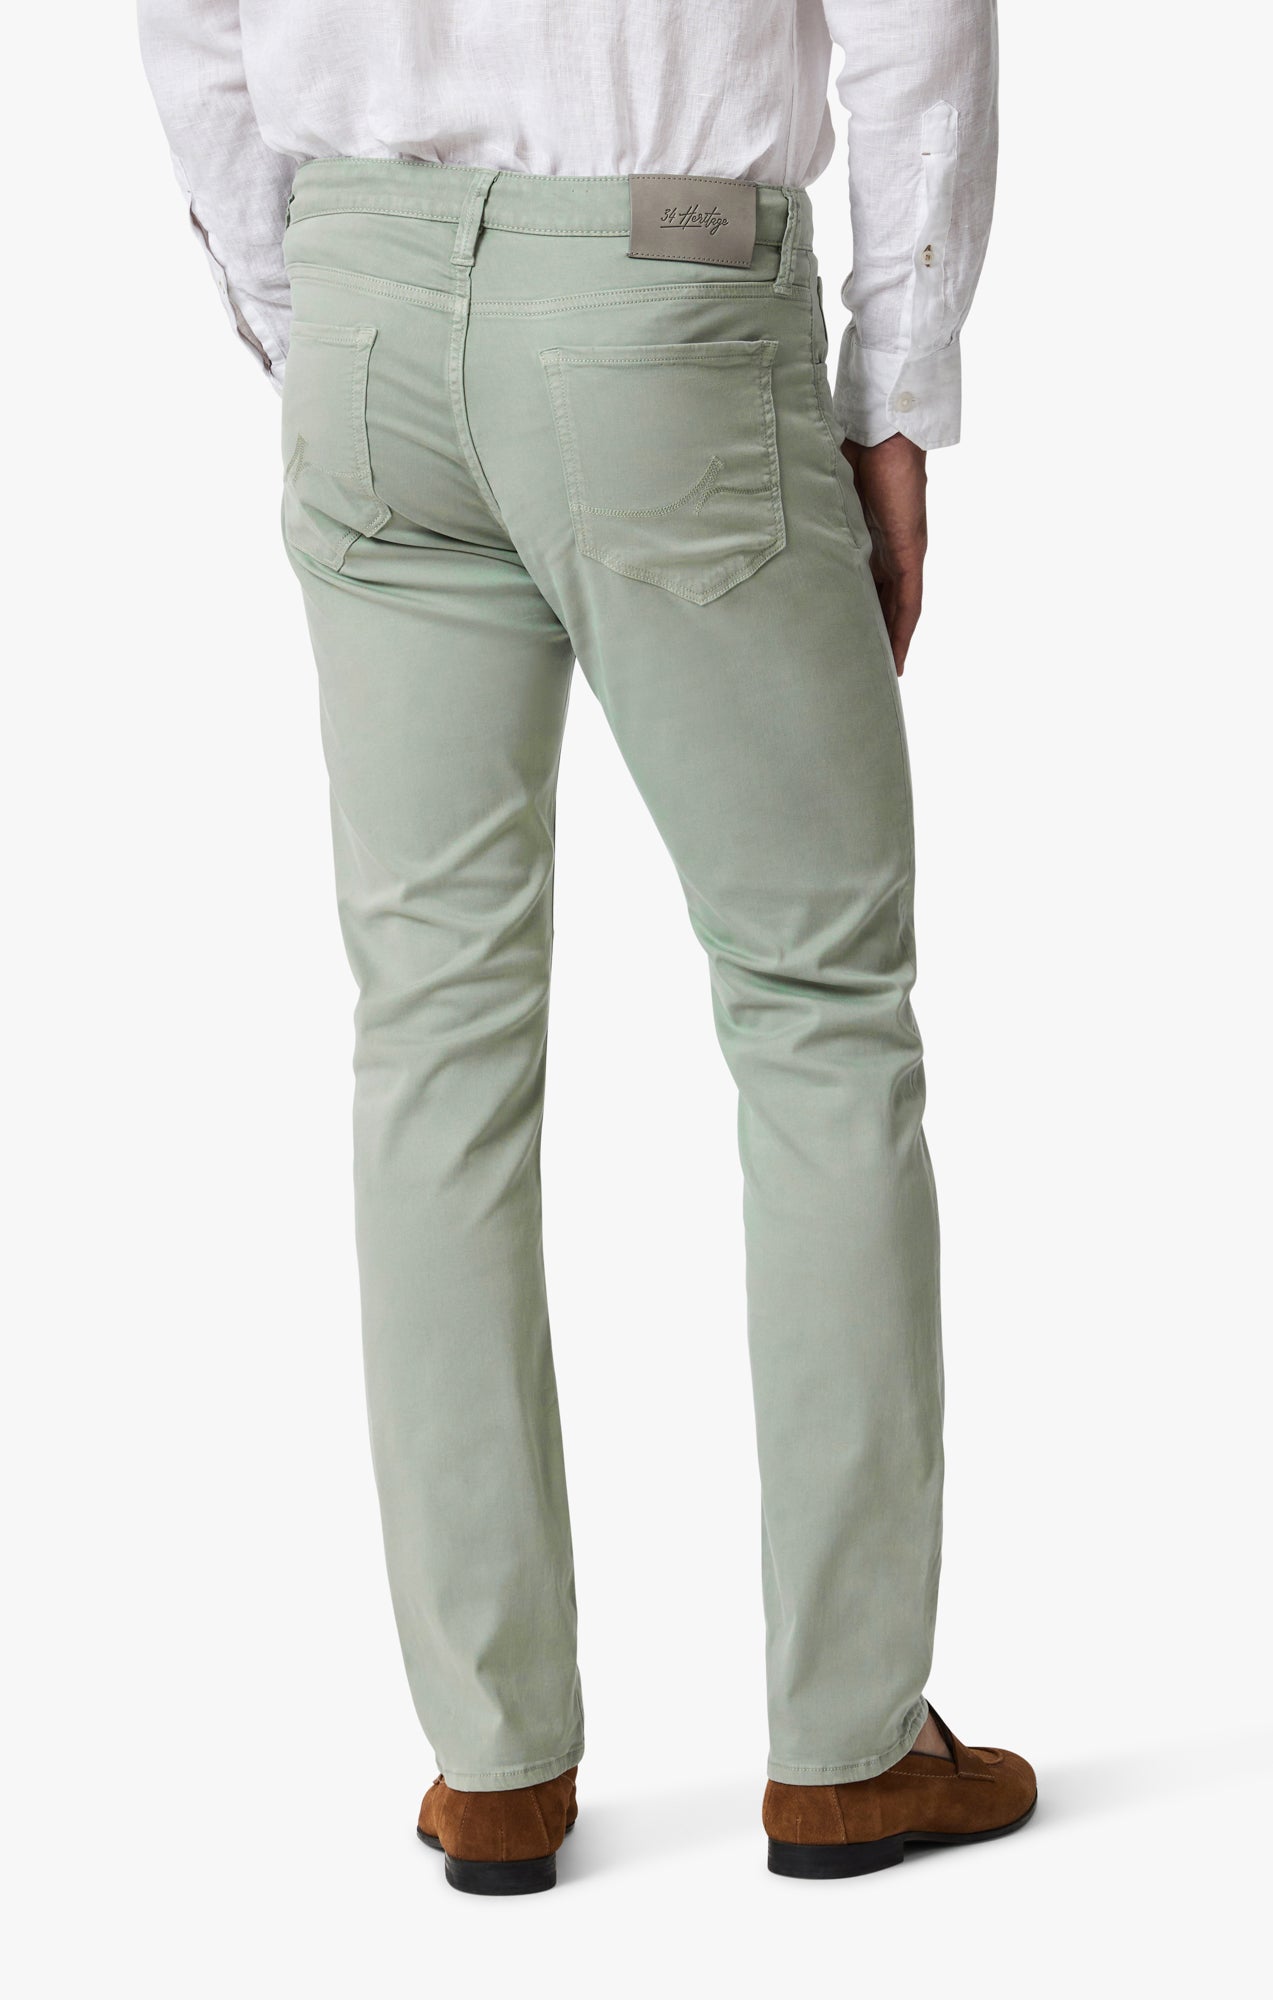 Courage Iceberg Twill Pant in Green